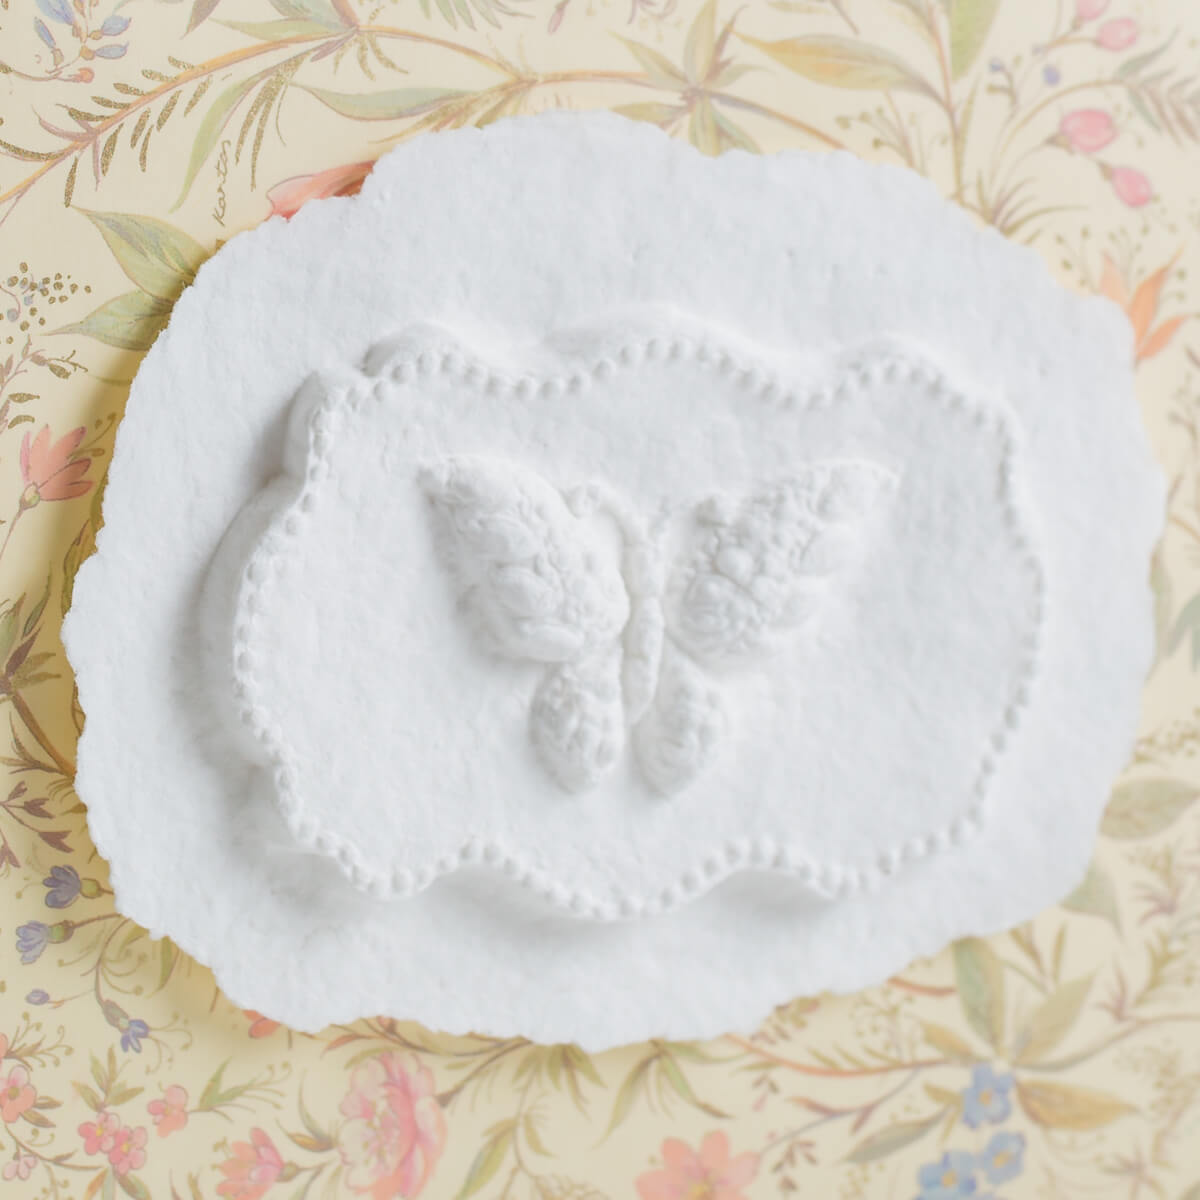 Butterfly - Scattering Biodegradable Urn Box for Human Ashes